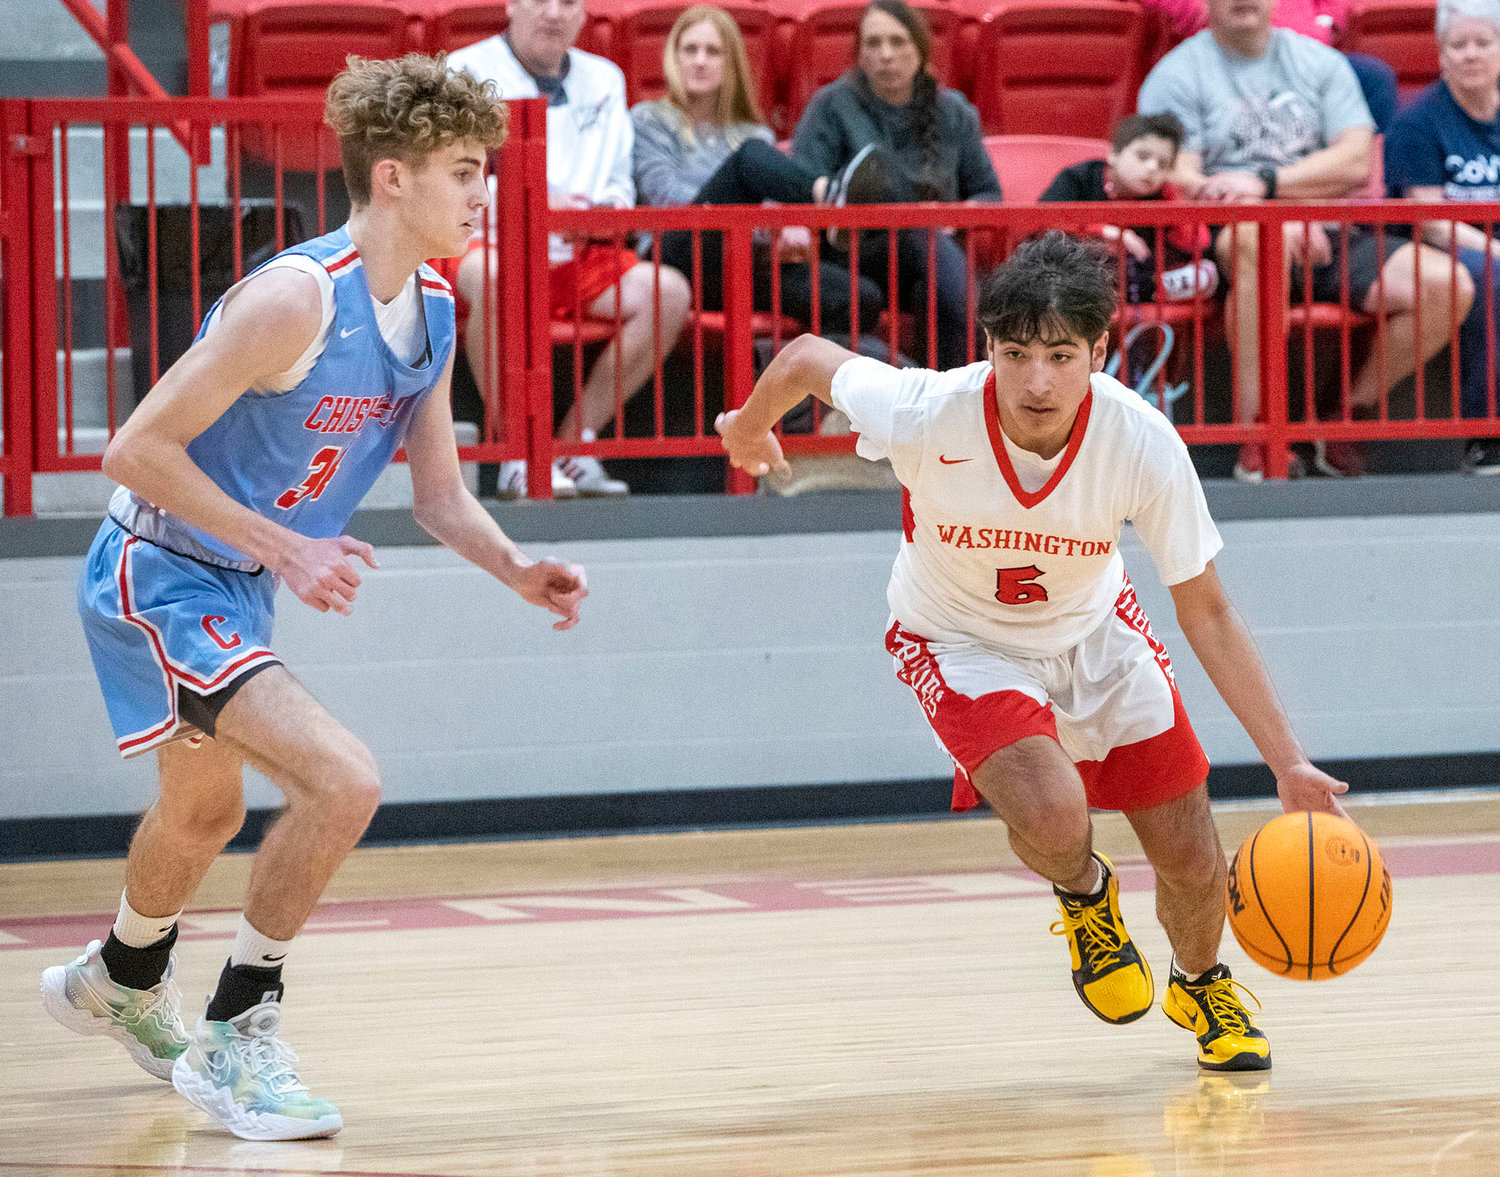 Washington senior Tony Trejo drives the ball into the lane during the Warriors’ 75-43 win over Chisholm in the District tournament. Trejo scored a team-high 14 points. Washington plays Perry at 7 p.m. Friday in the Regional tournament in Perry.